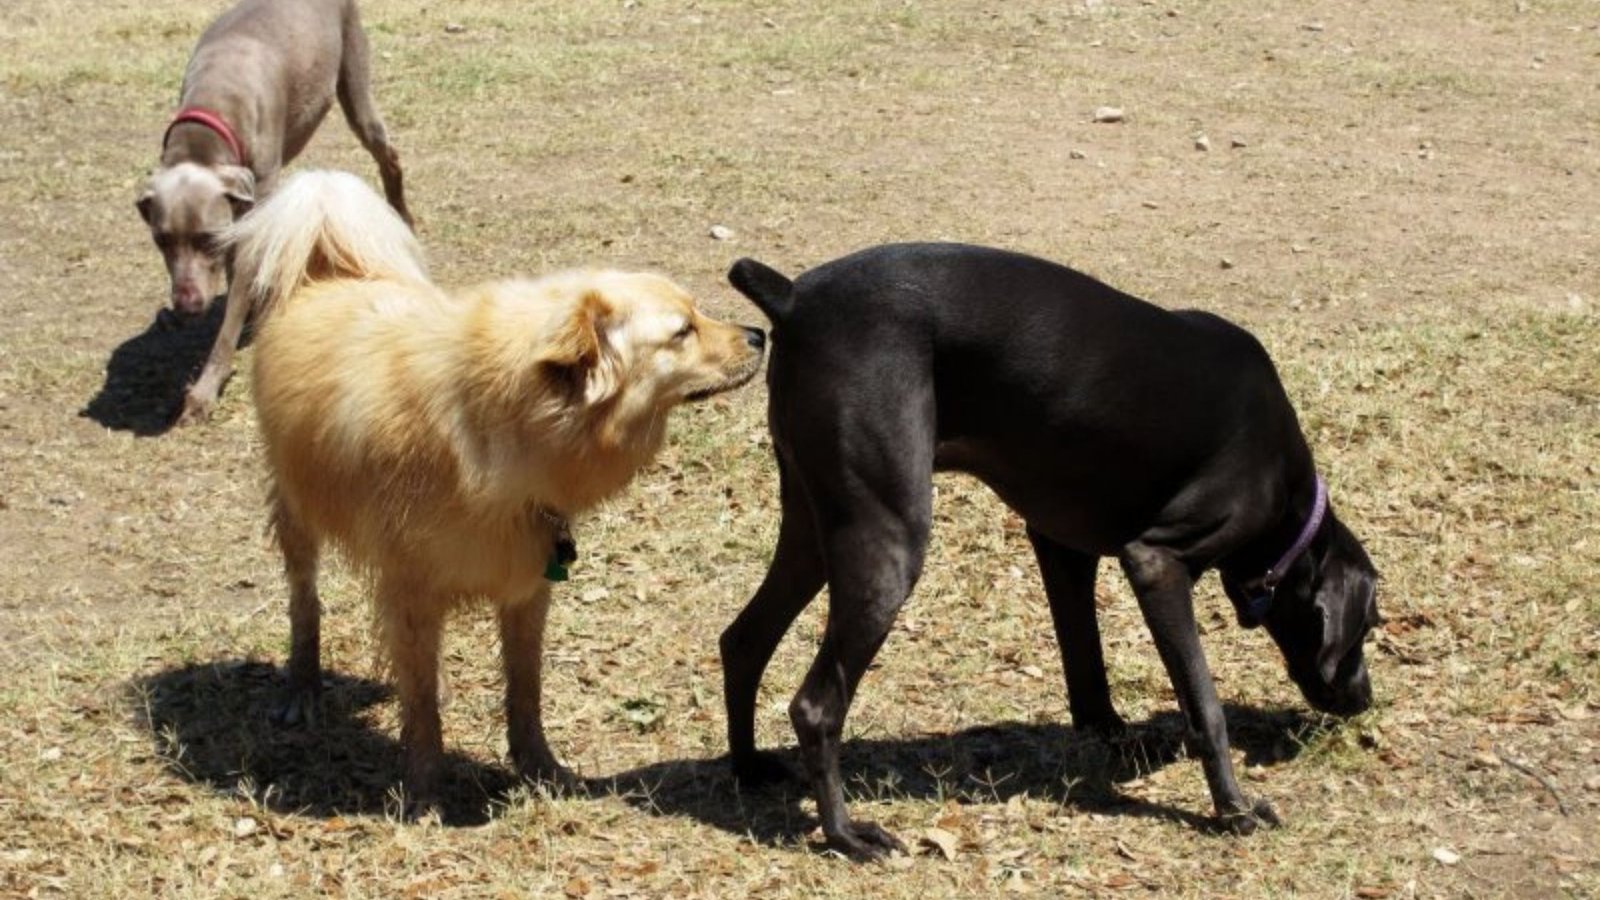 WHY DOGS LICK THEIR BUTTS AND OTHER DOGS' BUTTS